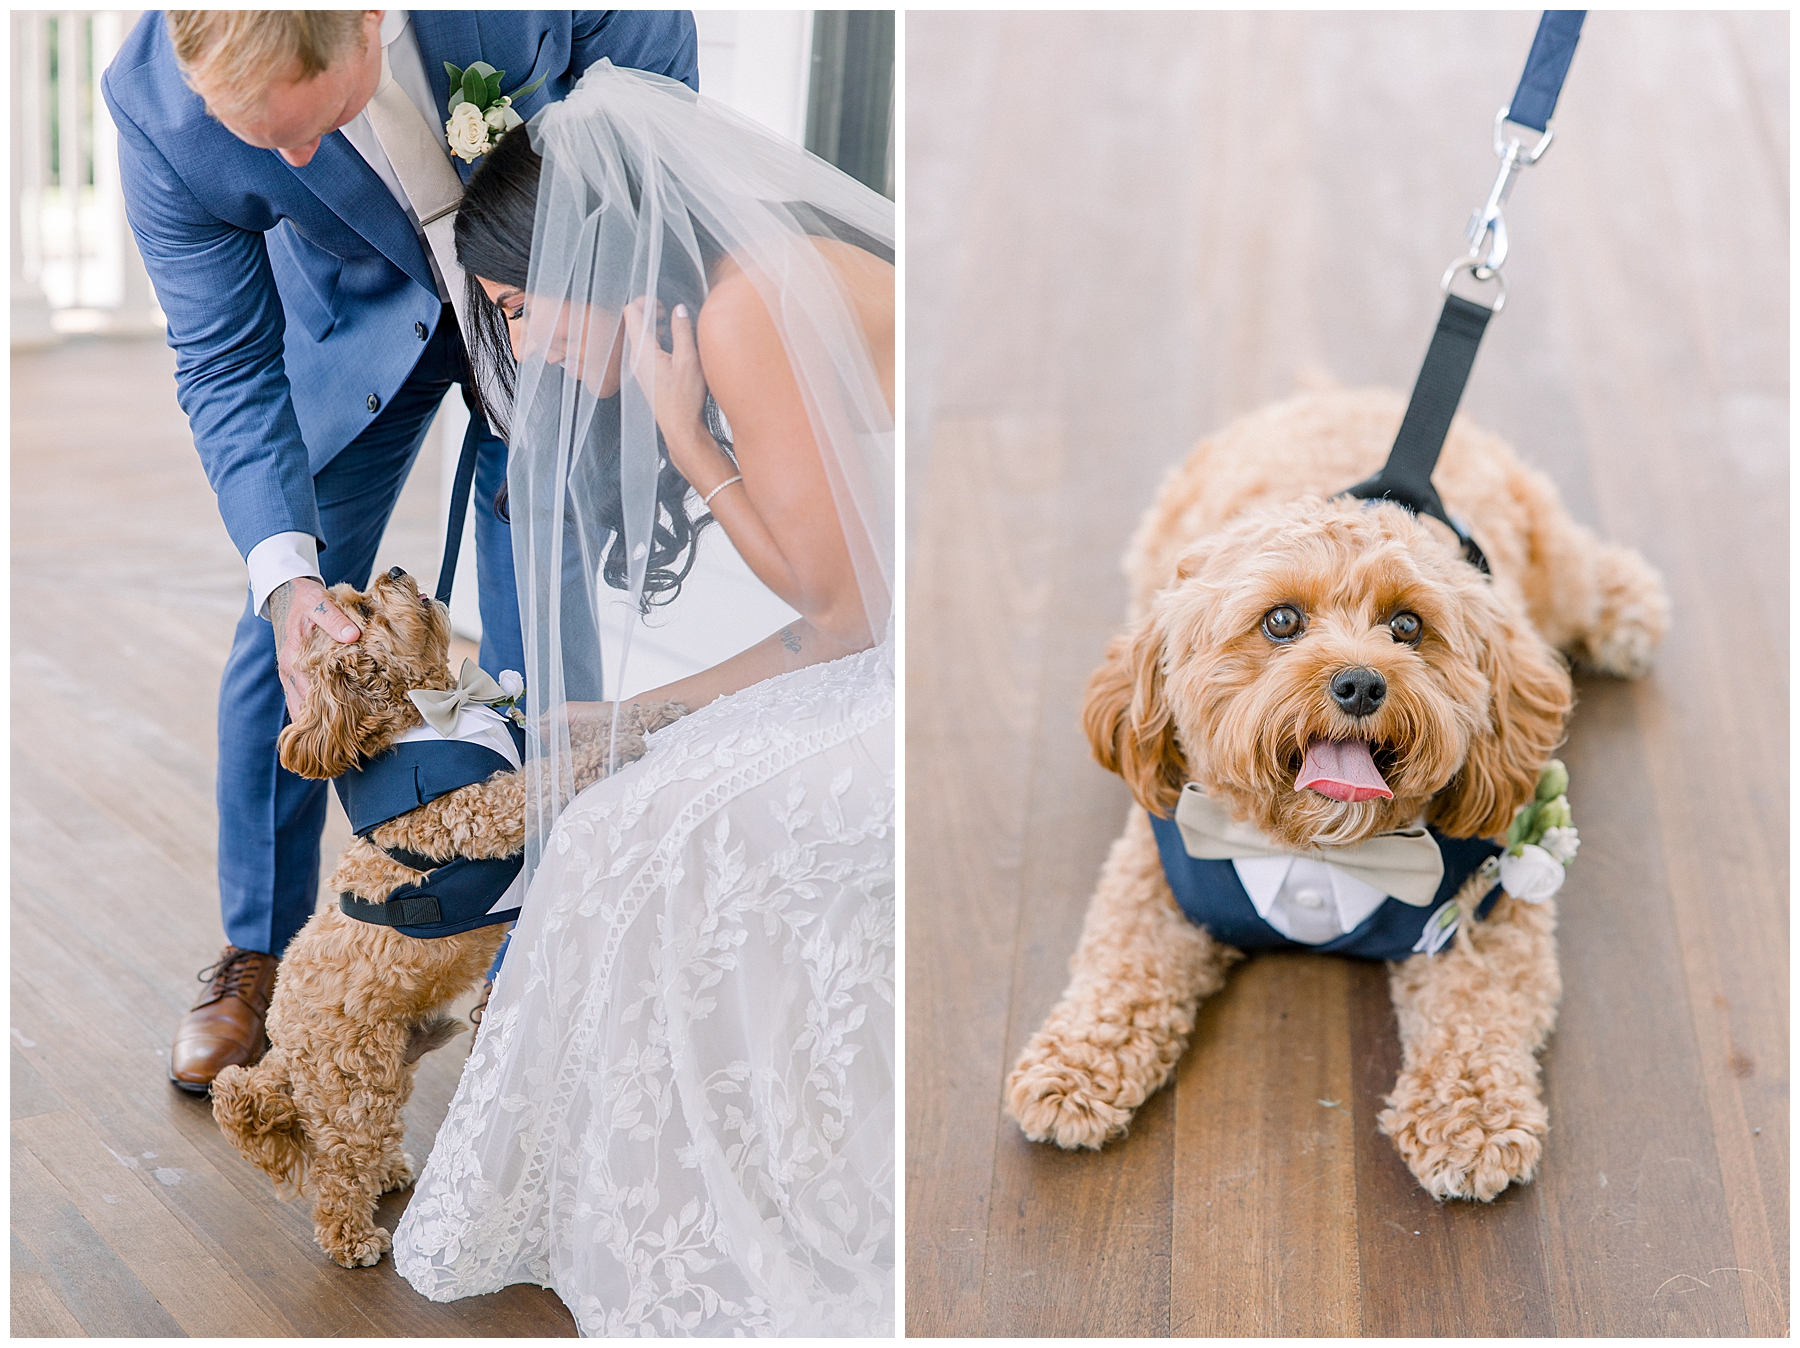 wedding rings from Kimpton Taconic Hotel Wedding with bride, groom and their dog in tux